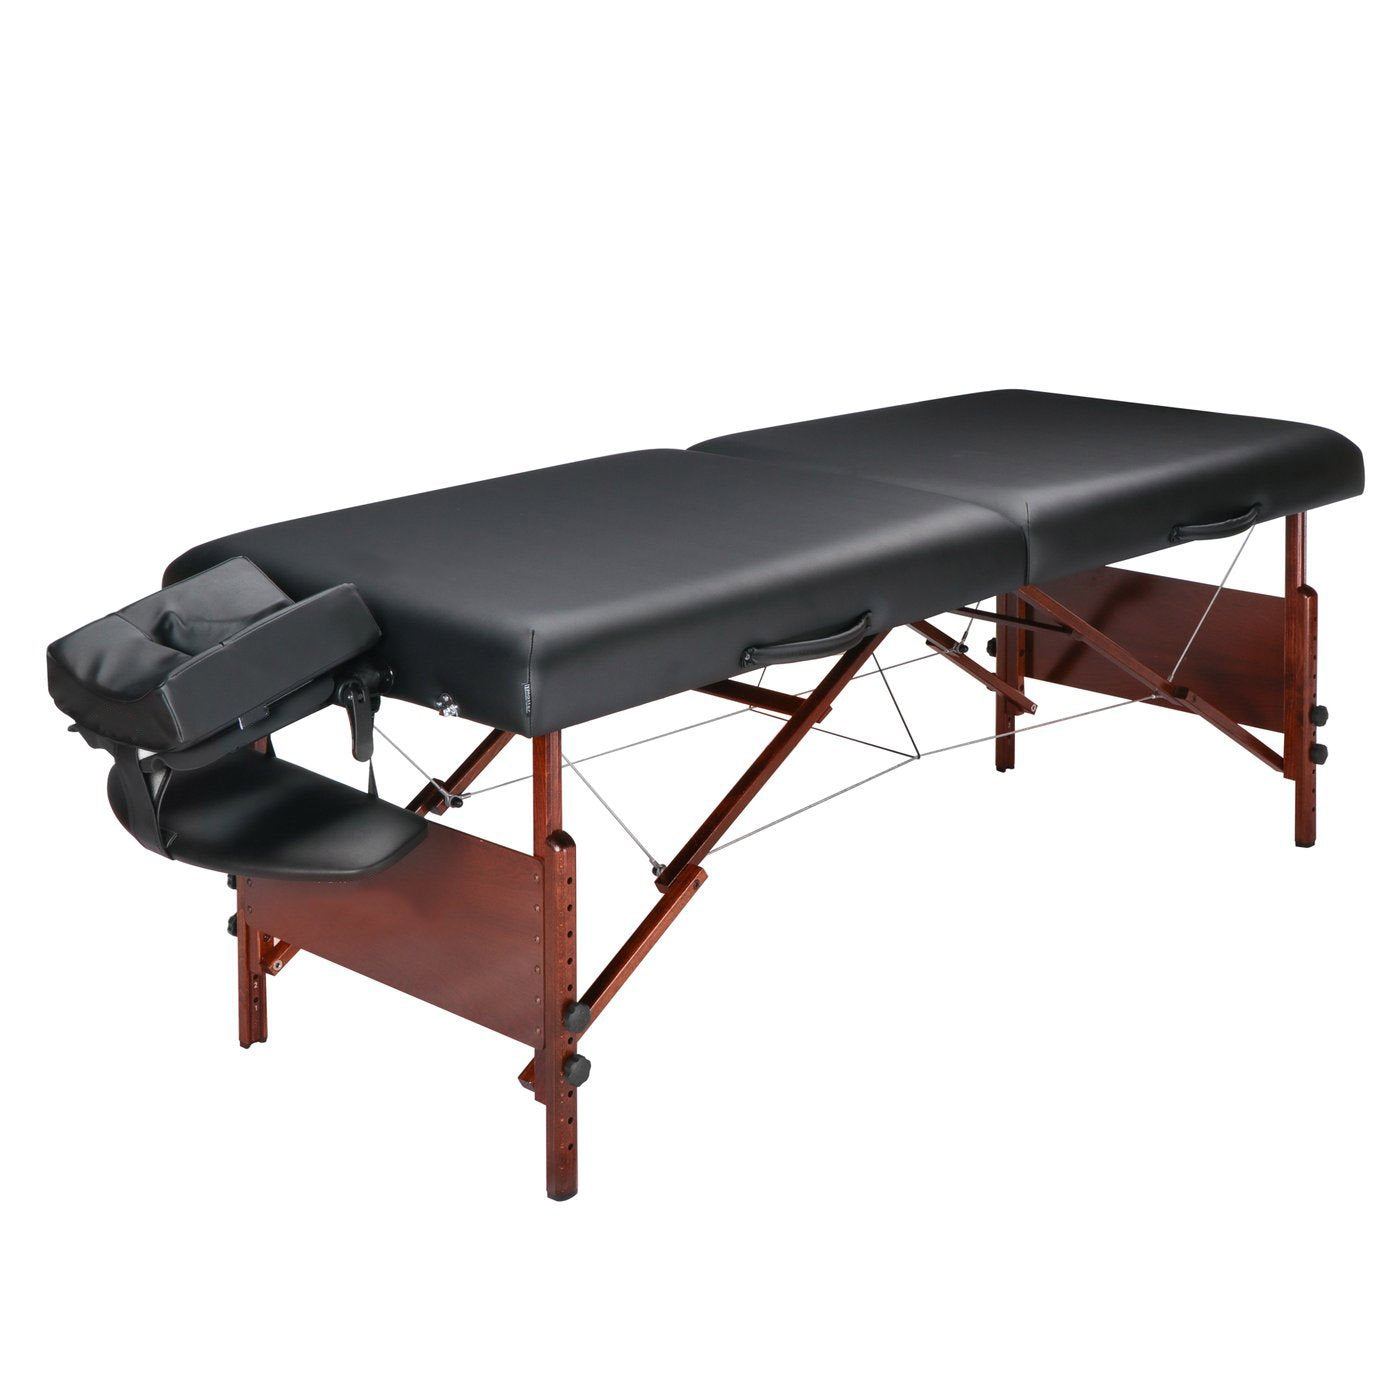 30" DEL RAY™ Portable Massage Table Package with 3" Thick Cushion of Foam for Ultimate Comfort! (Black Color)